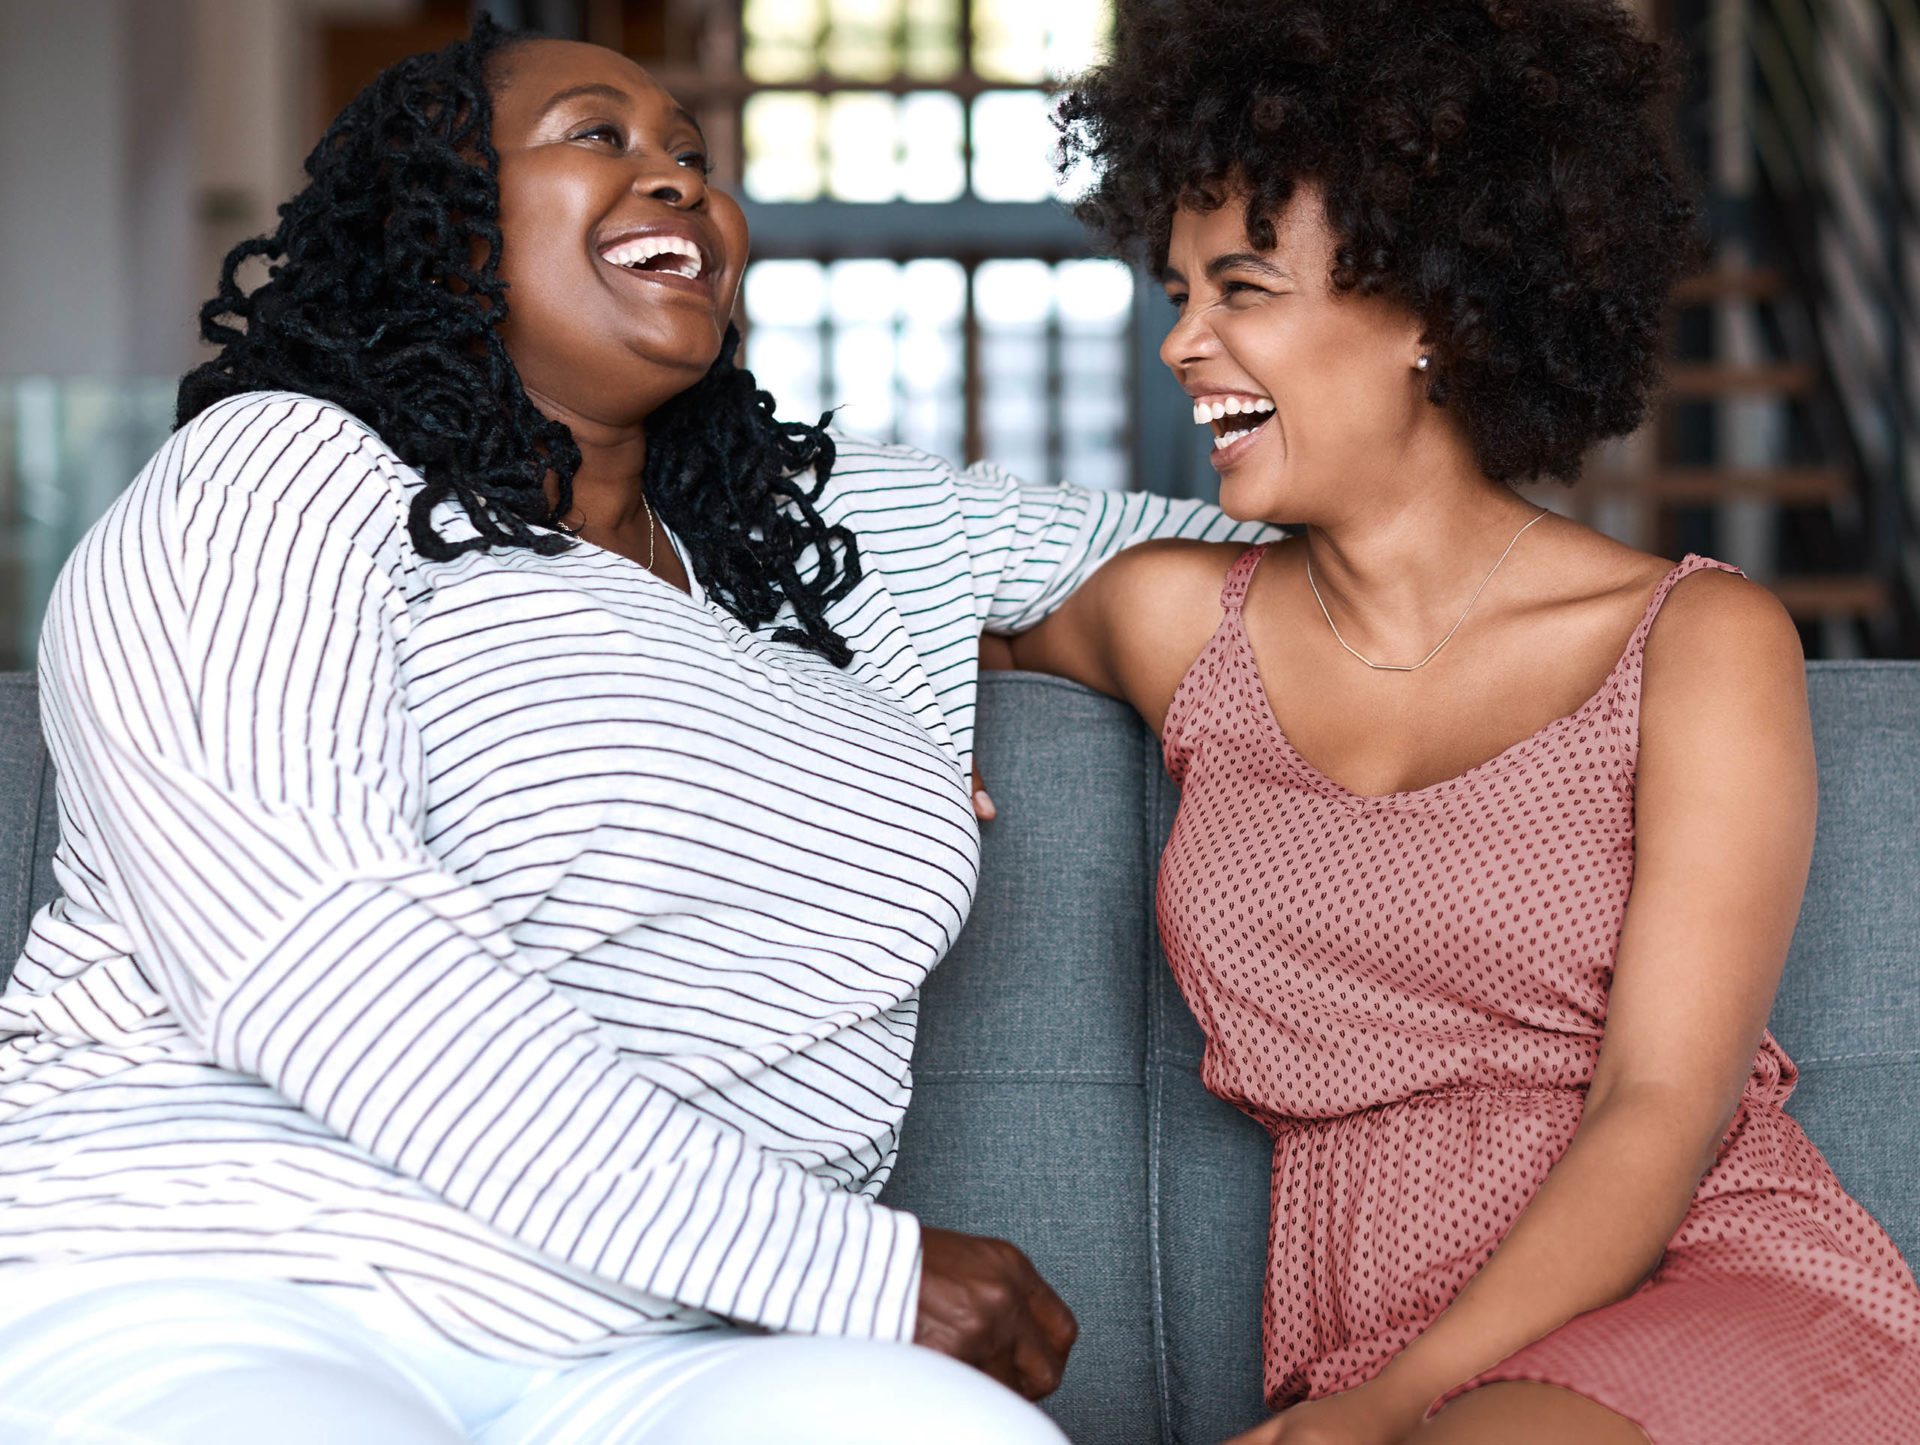 Two young women laughing on a couch.